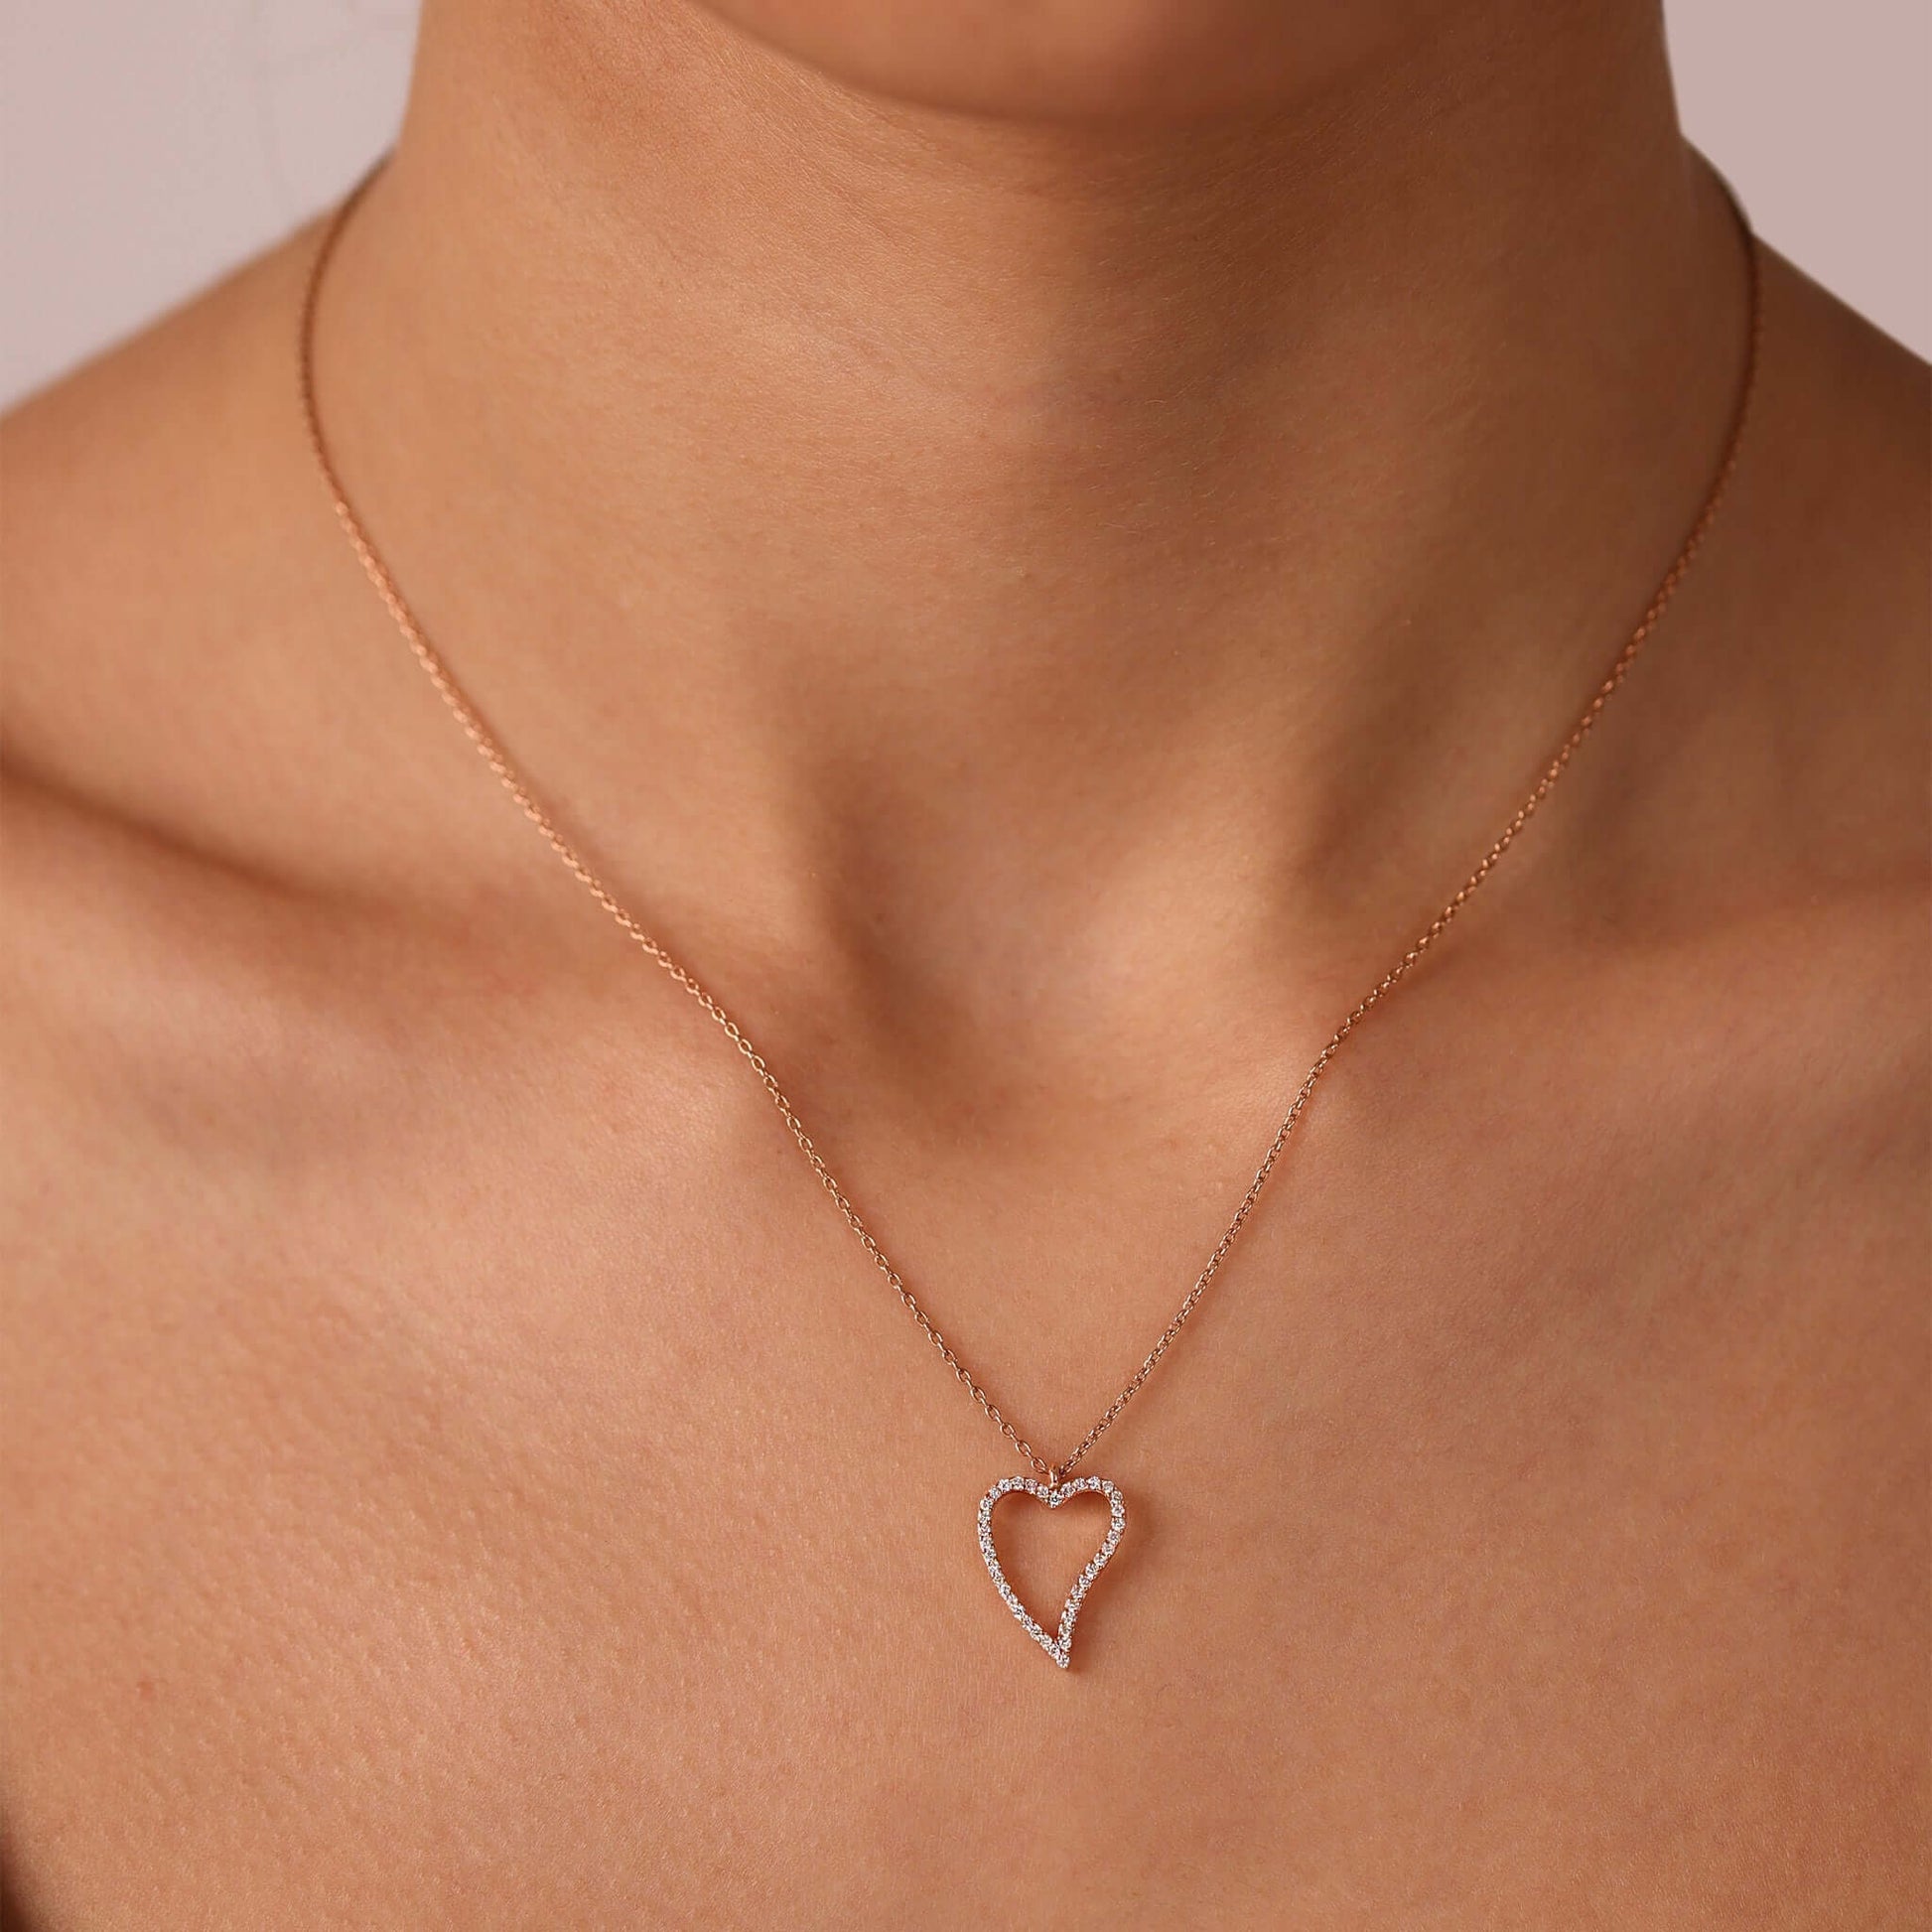 Jewelry Hearts | Diamond Pendant | 0.18 Cts. | 18K Gold - necklace Zengoda Shop online from Artisan Brands